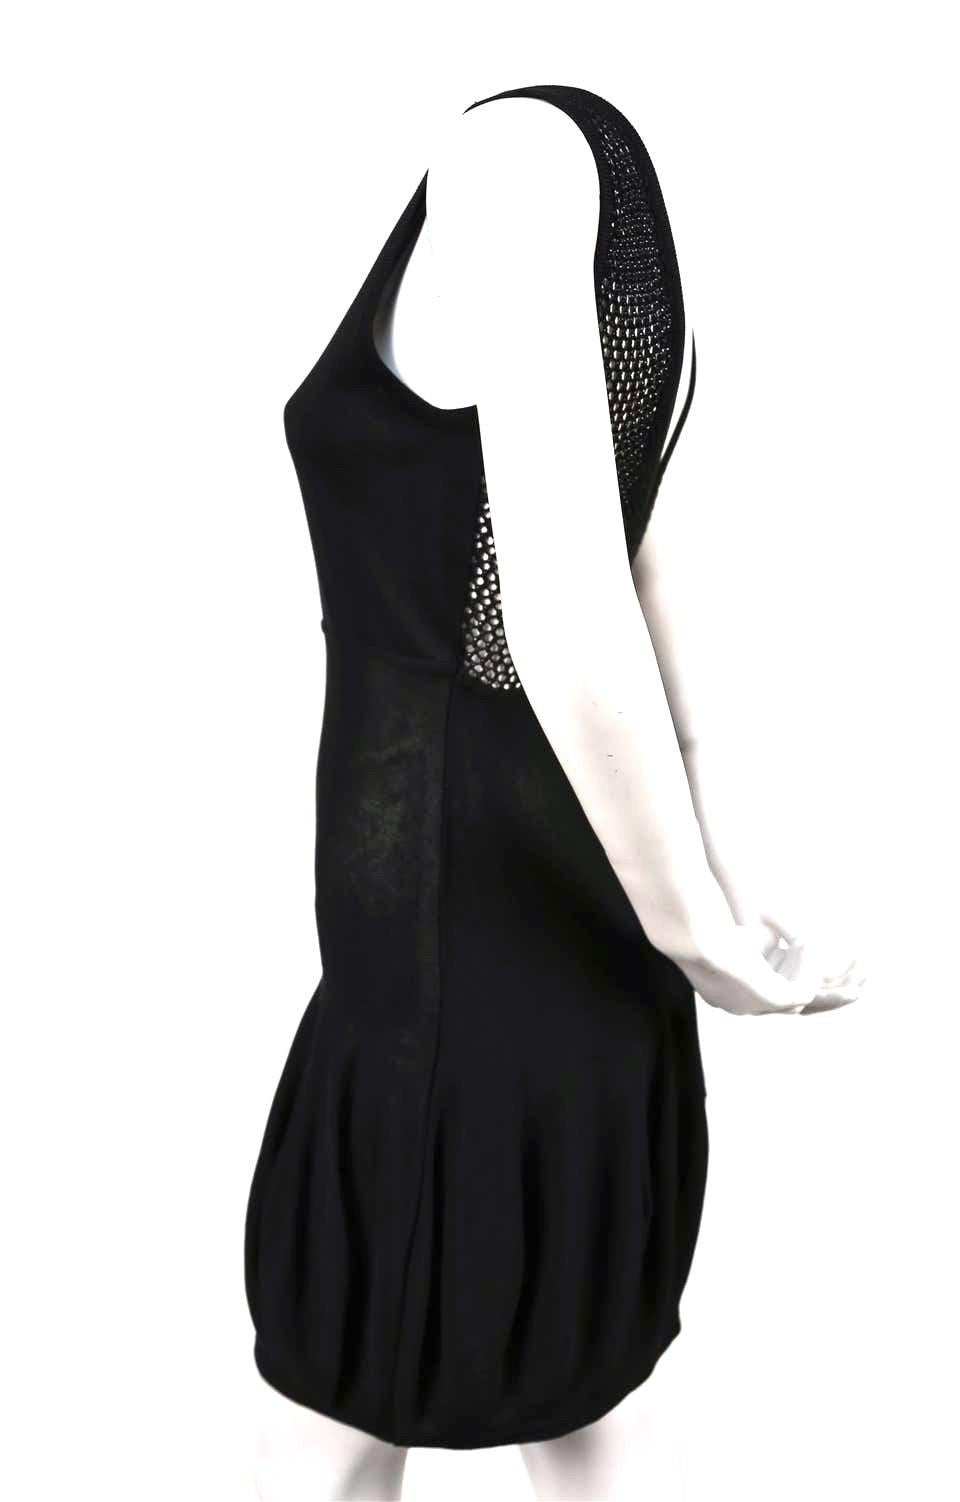 Very rare, uniquely shaped, jet-black knit dress with bubble hem and open knit back from Claude Montana dating to the 1980's. French size 40, which fits a US 4-6. Unstretched dress measures approximately 32